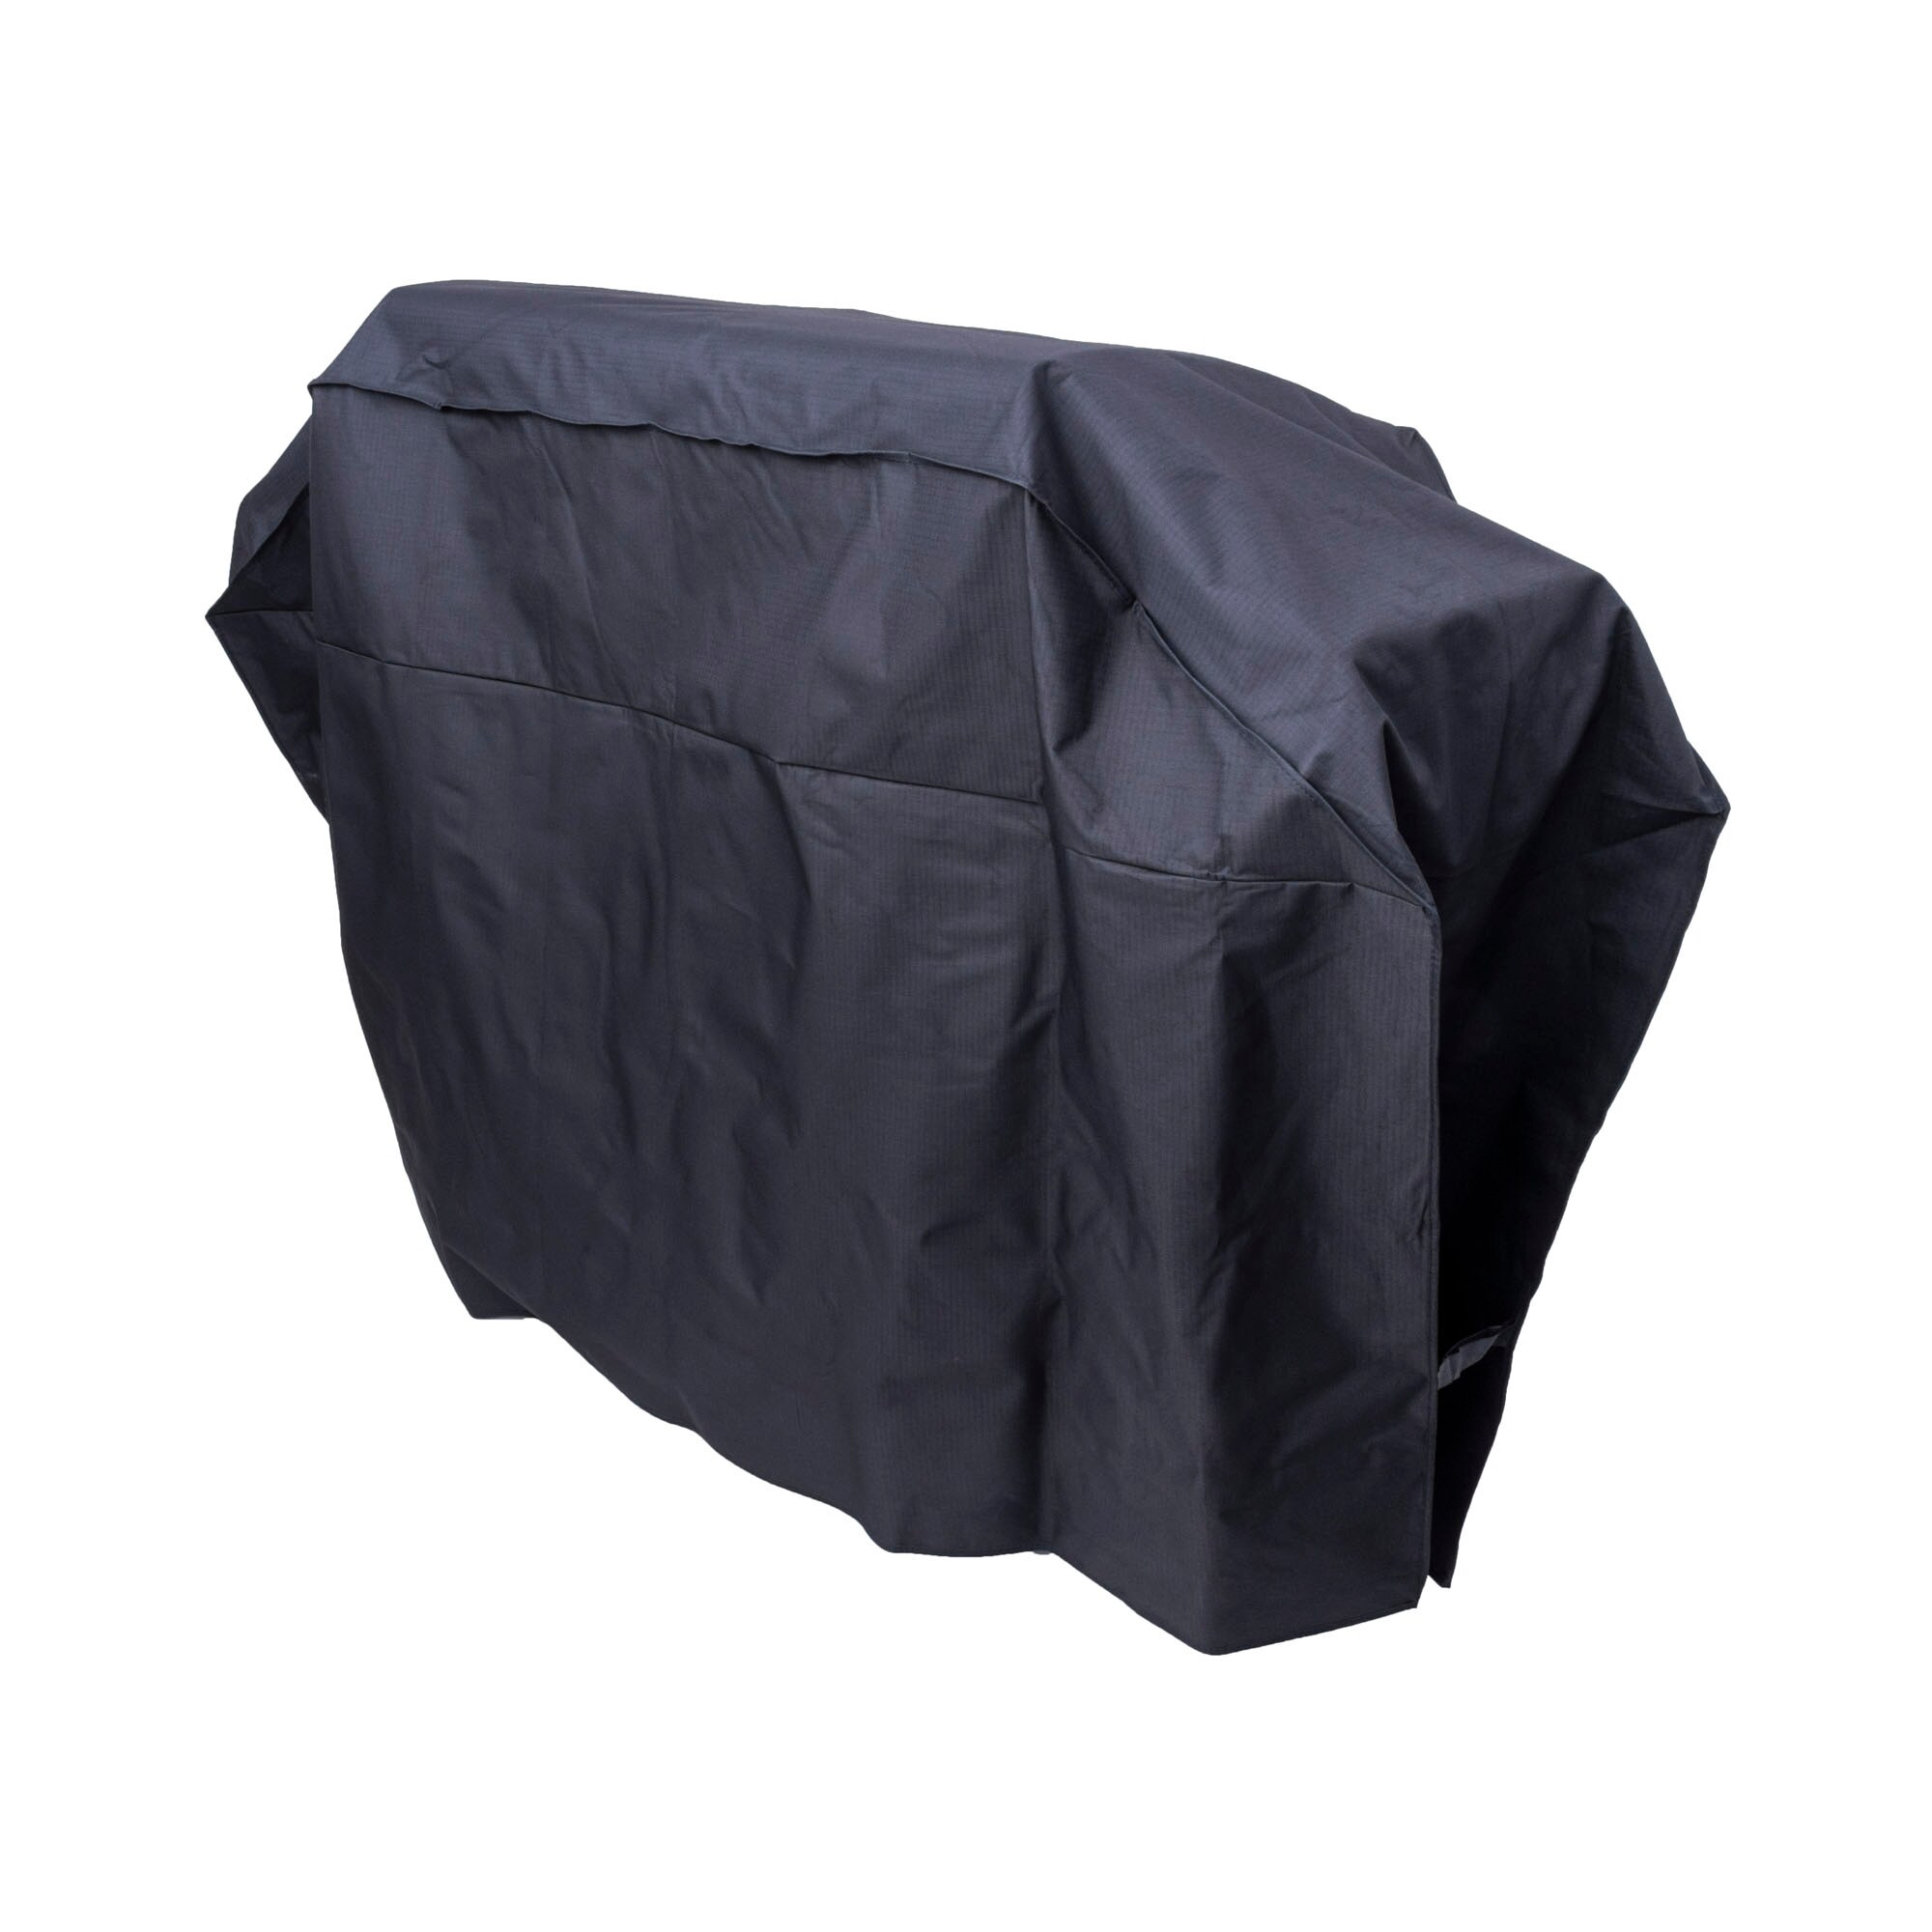 72" BBQ Grill Cover XXLarge For 5-6 Burner Charbroil & Costco Signateur 5 Burner 